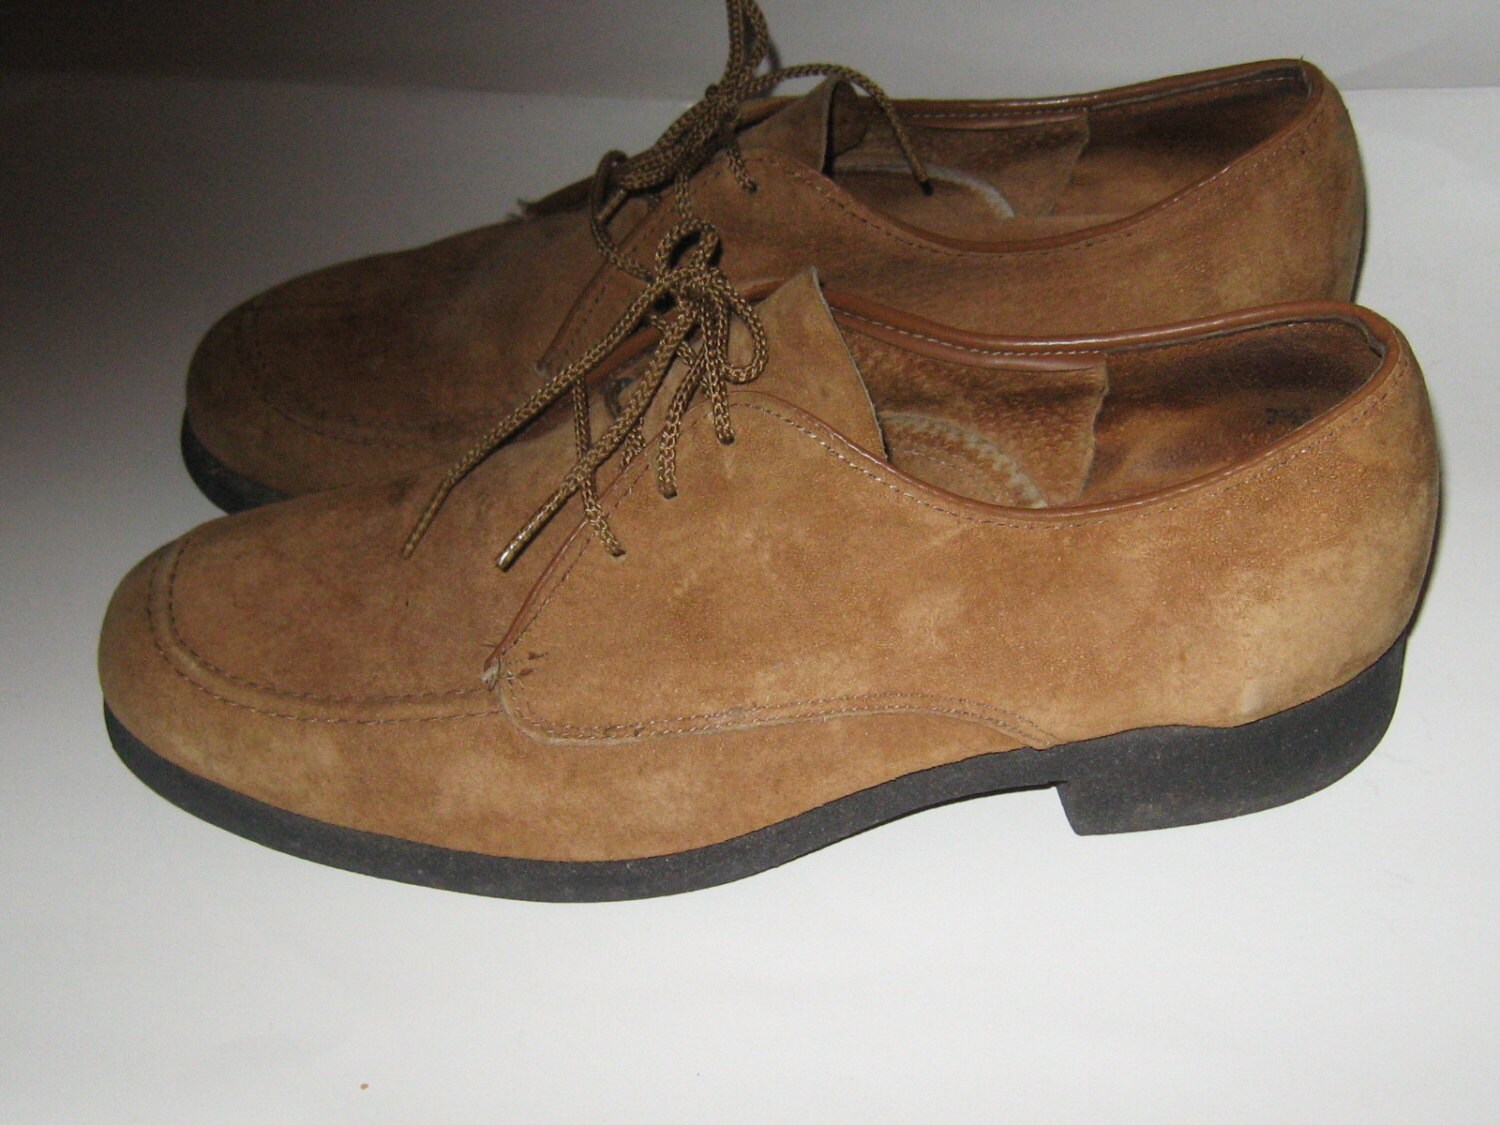 VINTAGE 1970s Brown Suede lace up by Linsvintageboutique